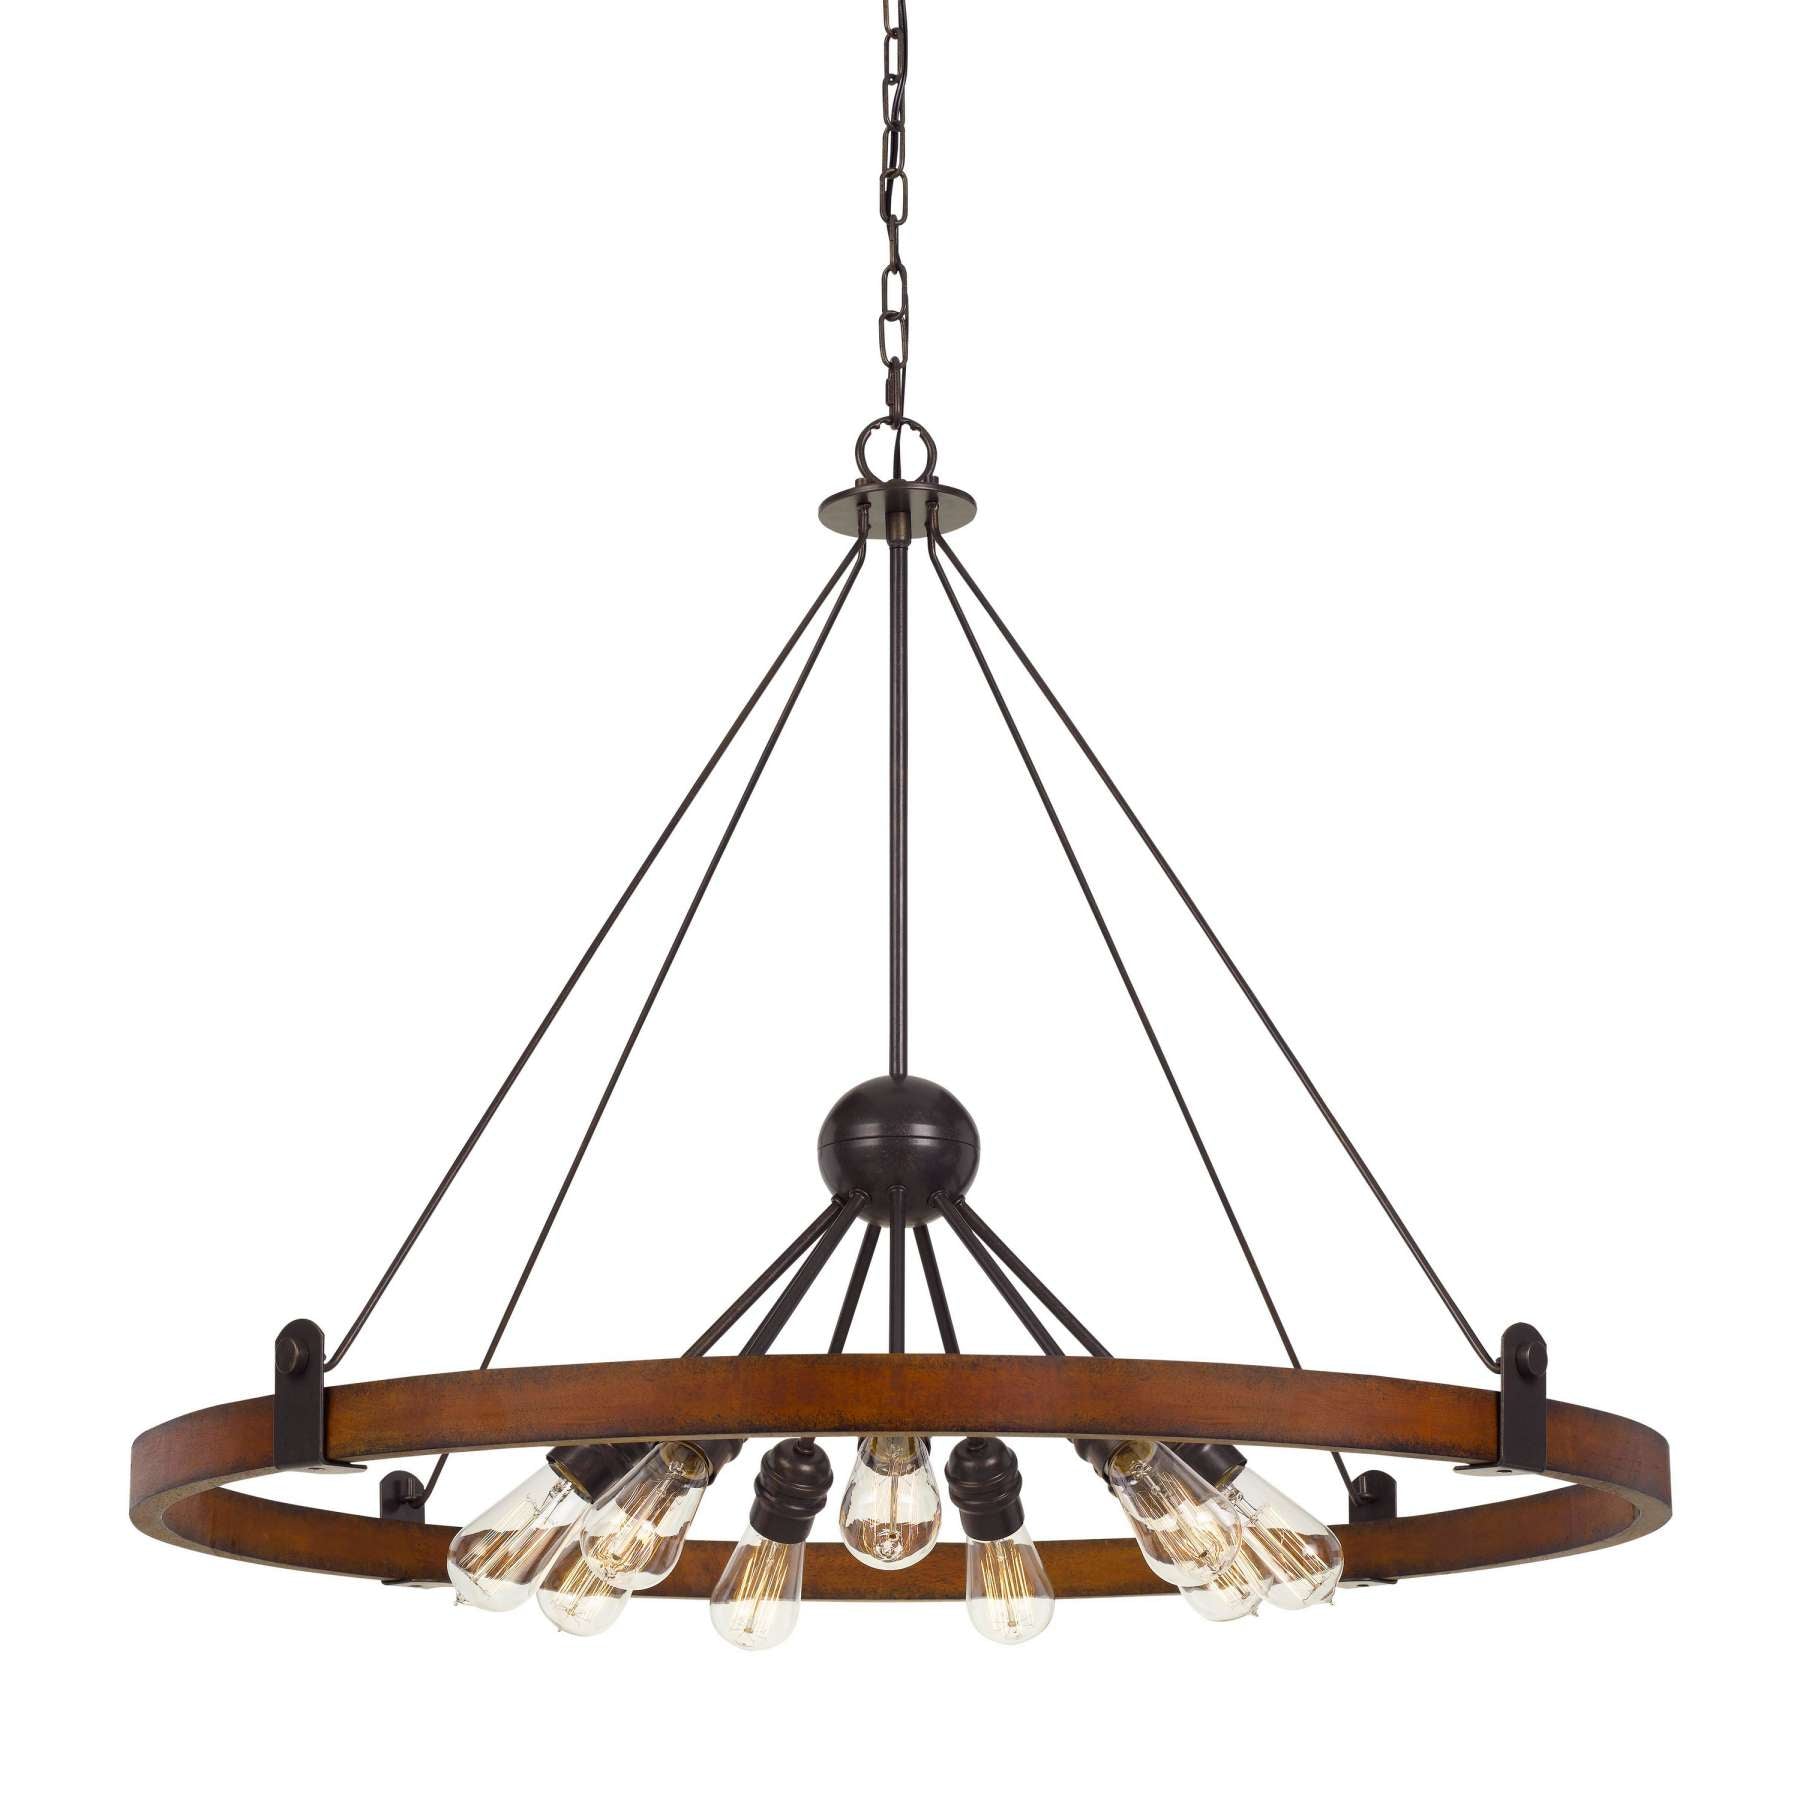 9 Bulb Chandelier With Round Wooden Frame And Metal Cantilevers, Brown By Benzara